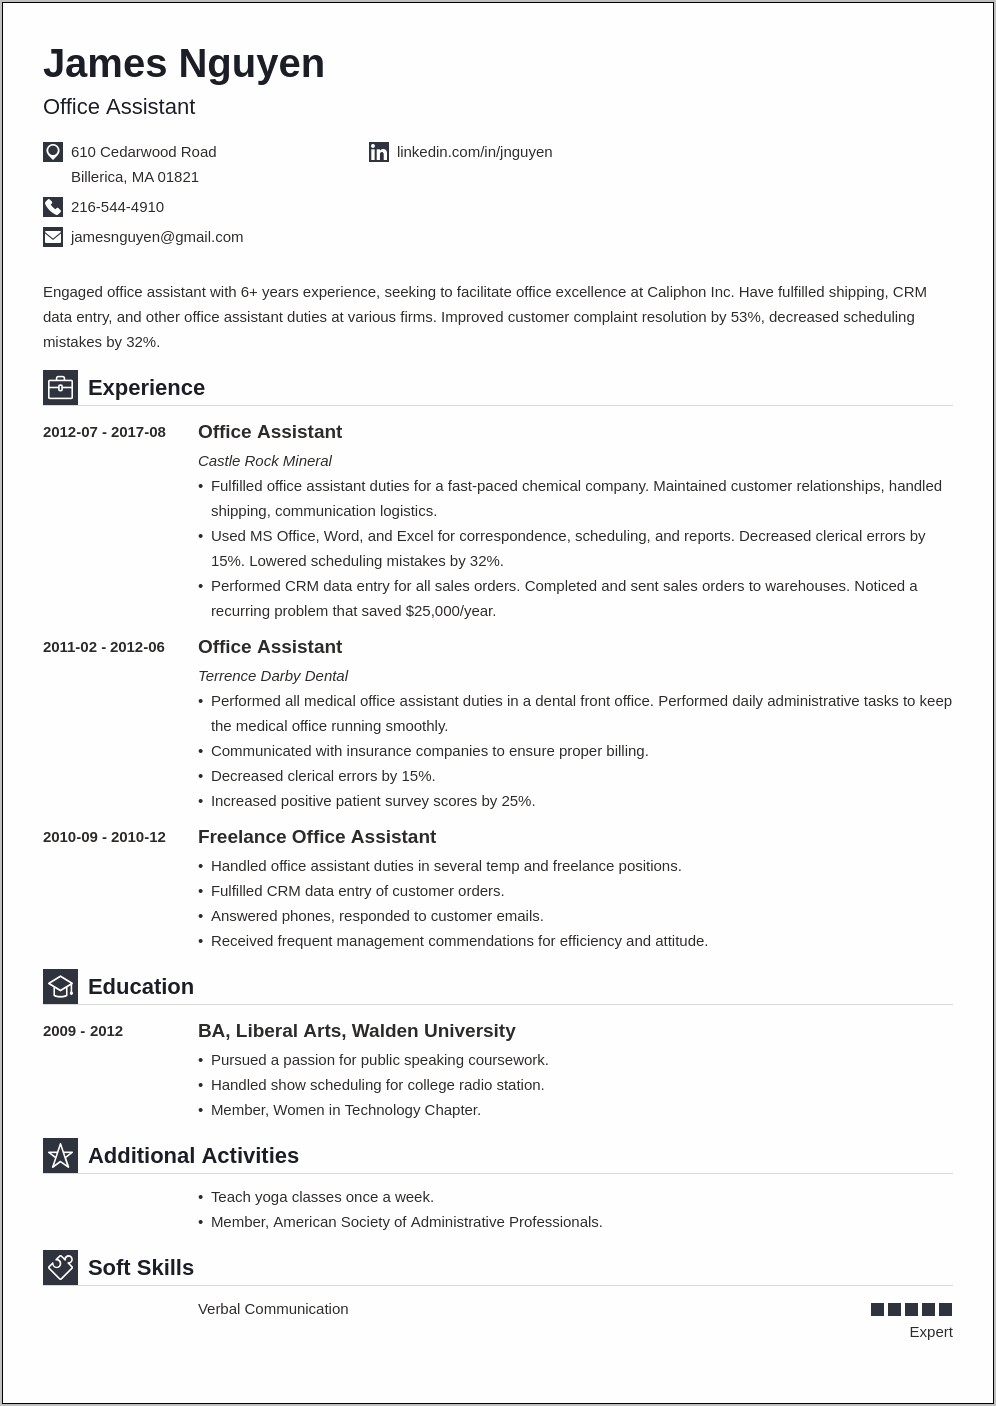 Best Resume Format For Office Assistant